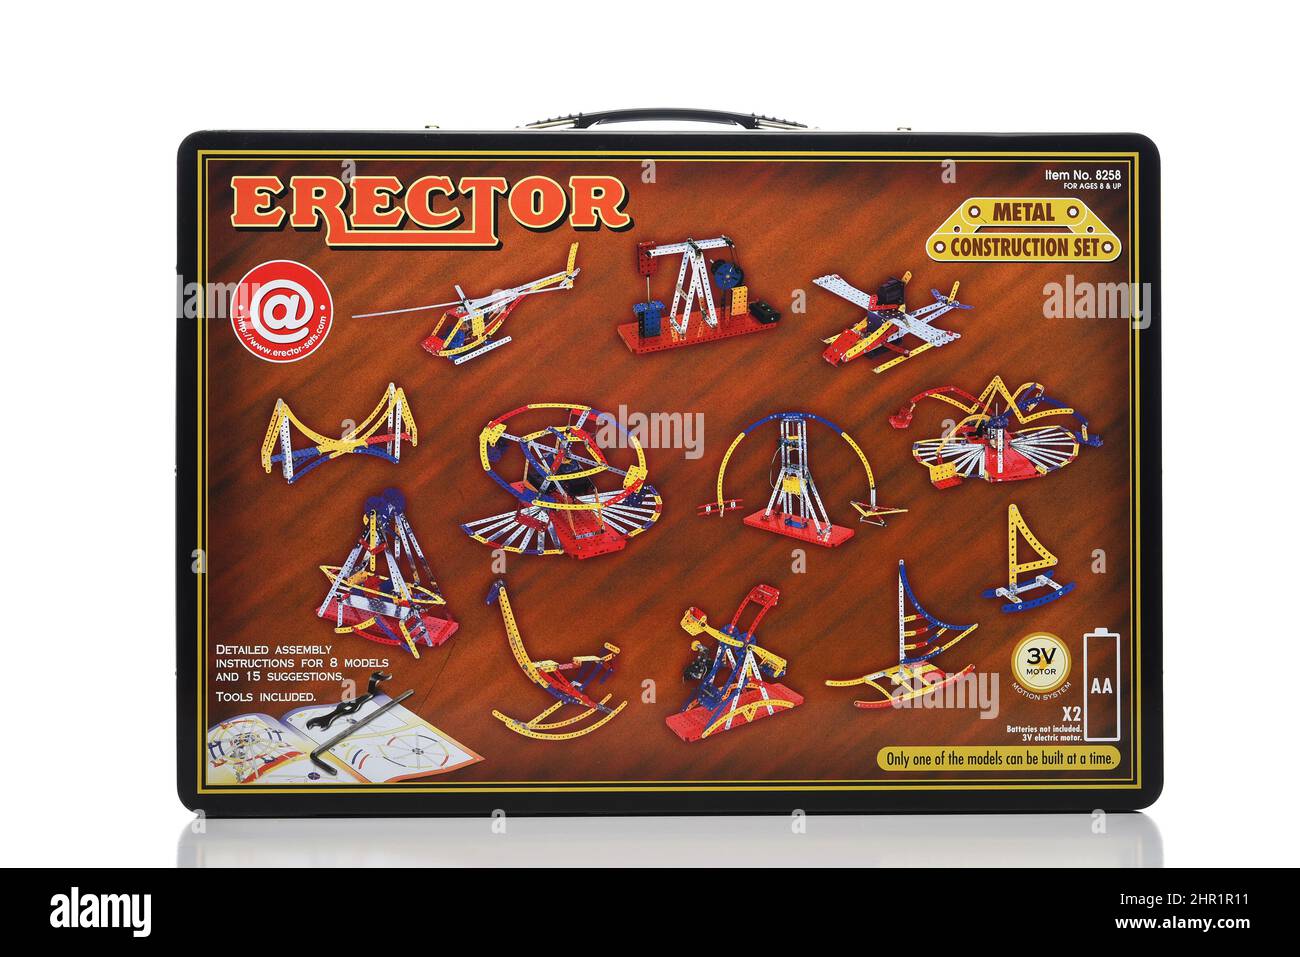 IRVINE, CALIFORNIA - 21 FEB 2022: An Erector Set, Motorized Construction Set for children ages 8 and up. Stock Photo